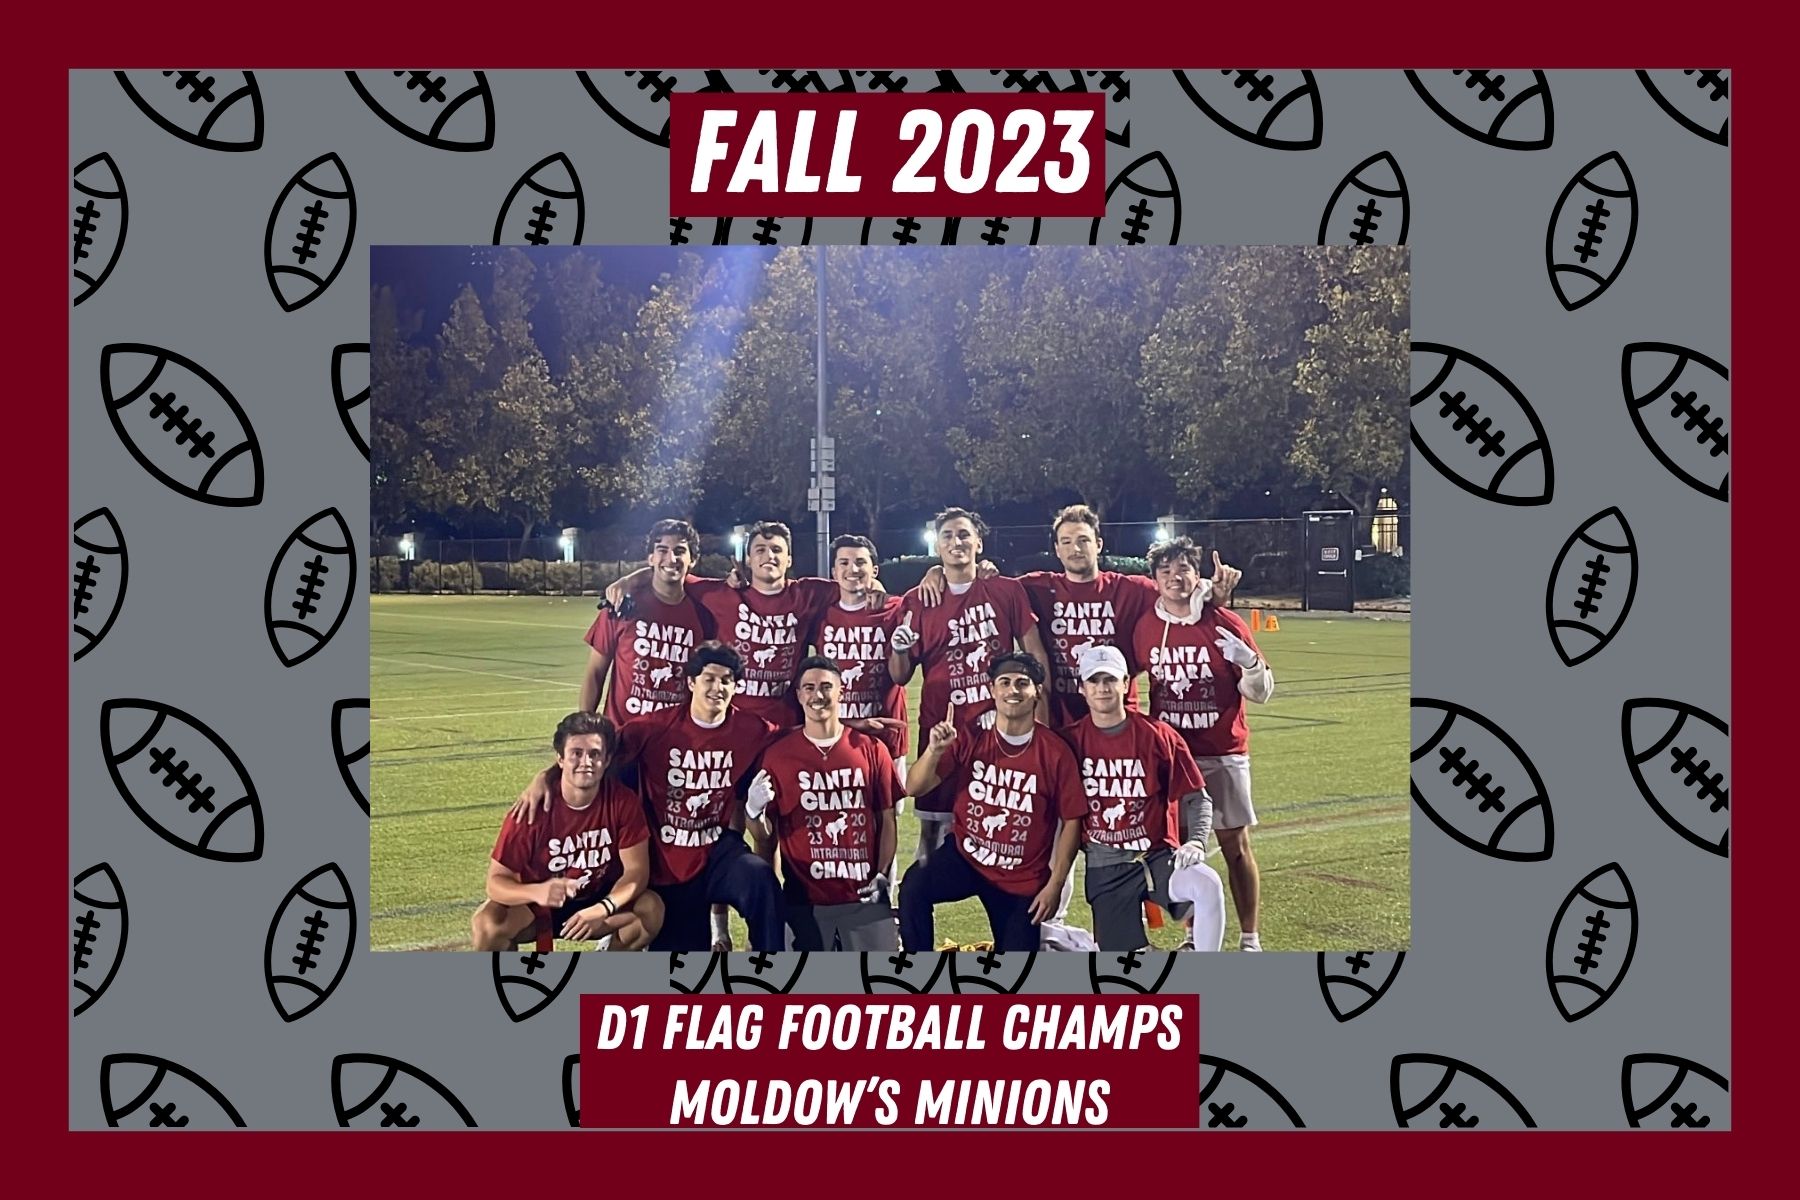 IM D1 Flag Football champs, Moldow's Minions, posing on Bellomy Field with their IM Champ T shirts